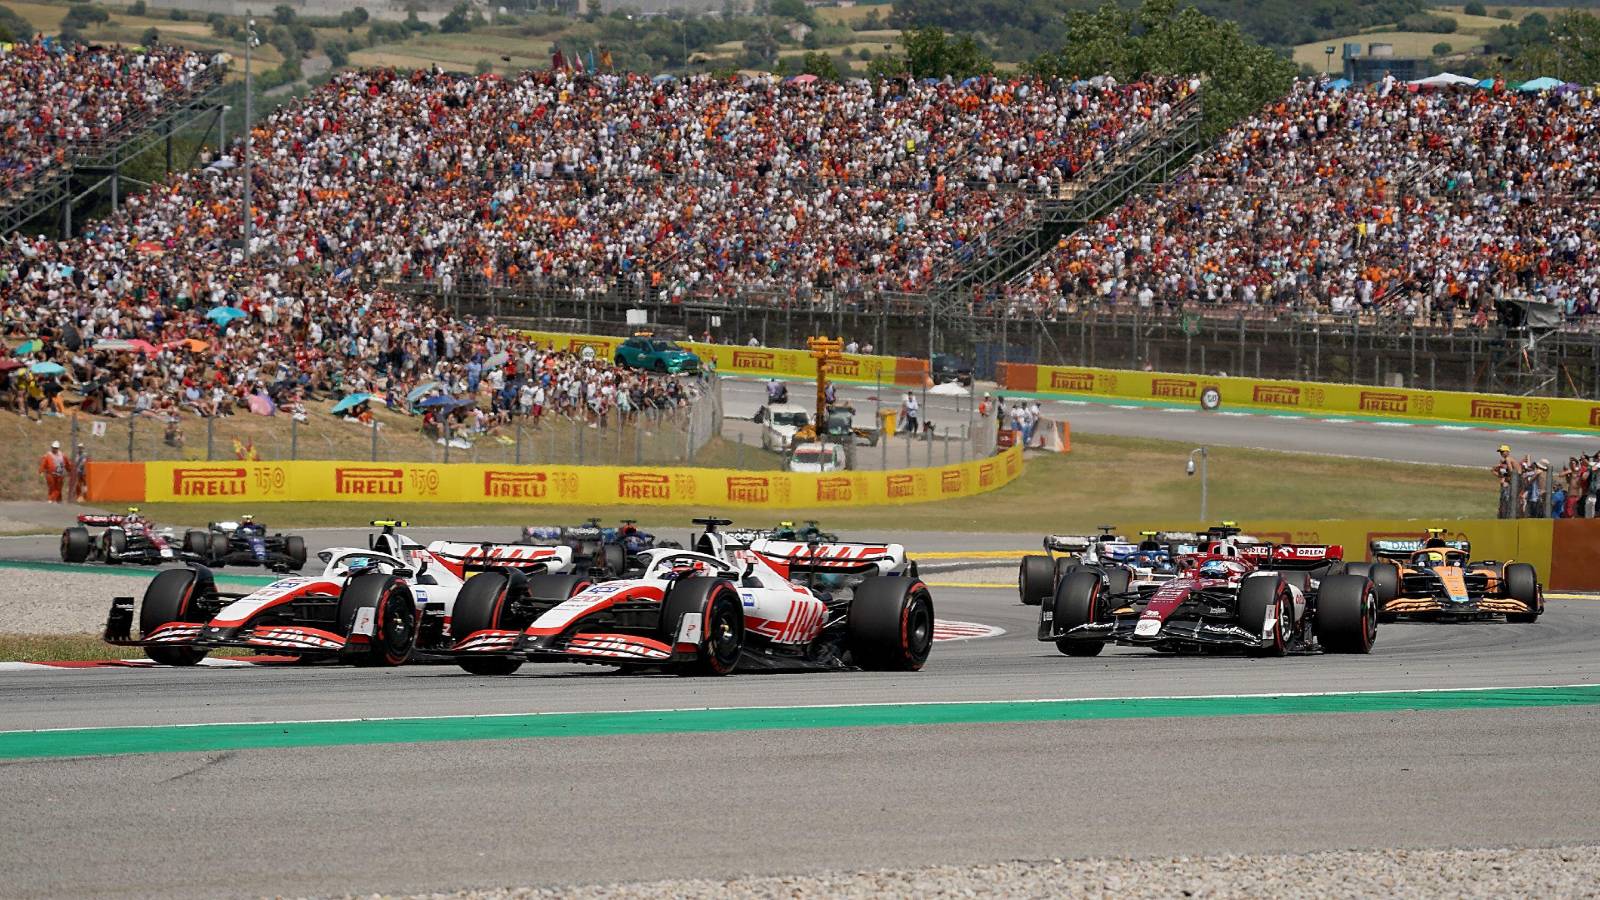 Haas cars at the front of a pack. Barcelona May 2022.